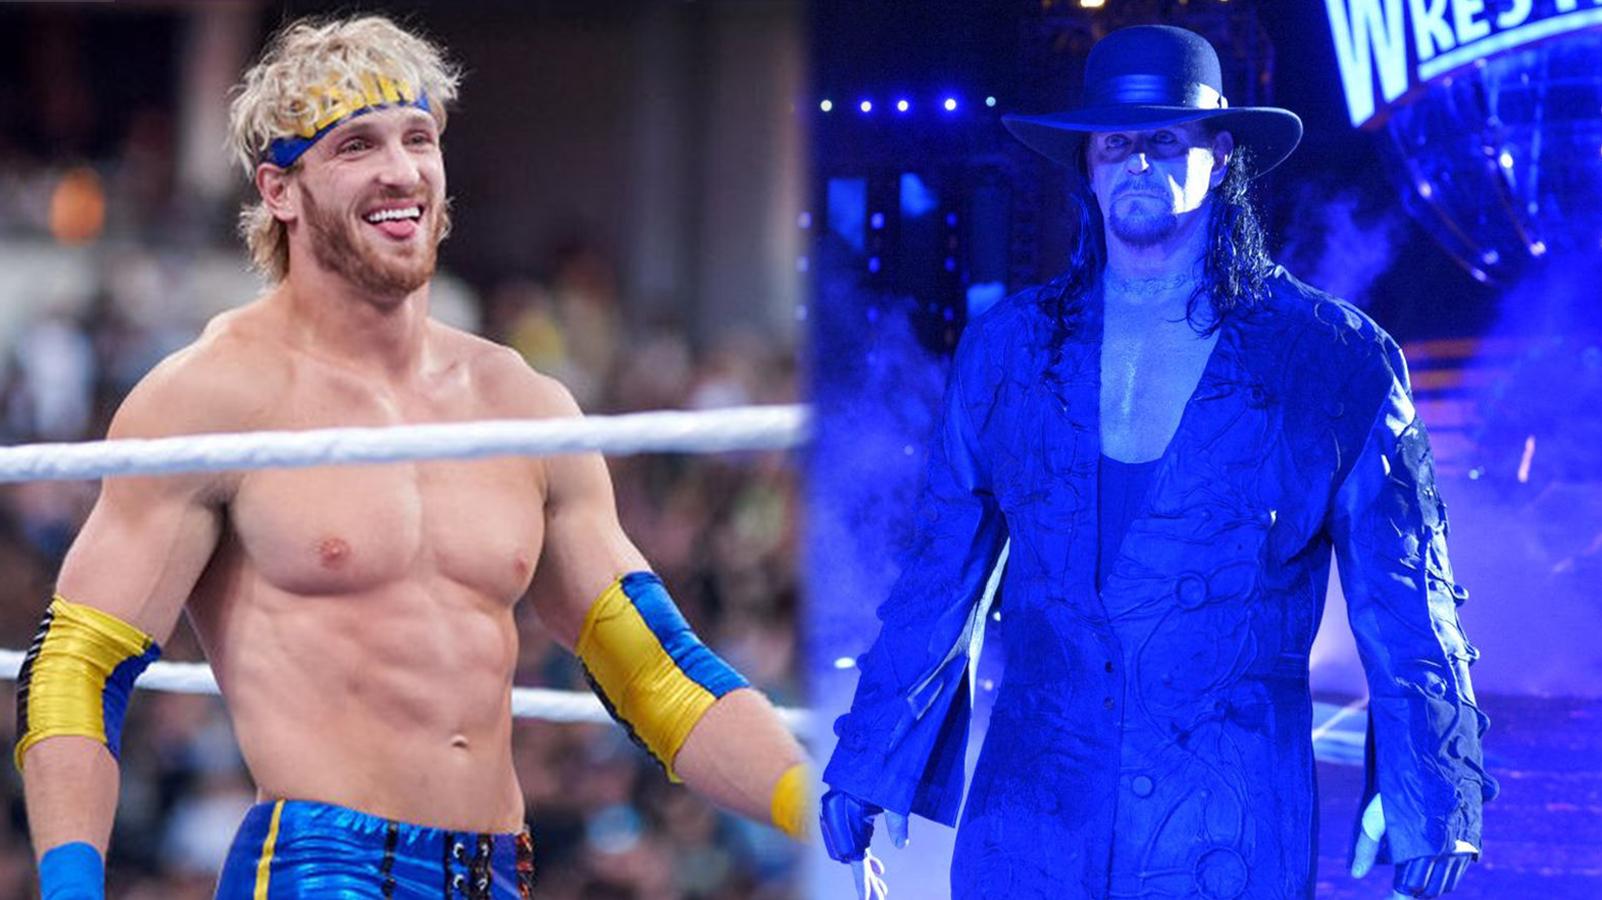 Logan Paul in a WWE ring next to The Undertaker making his entrance